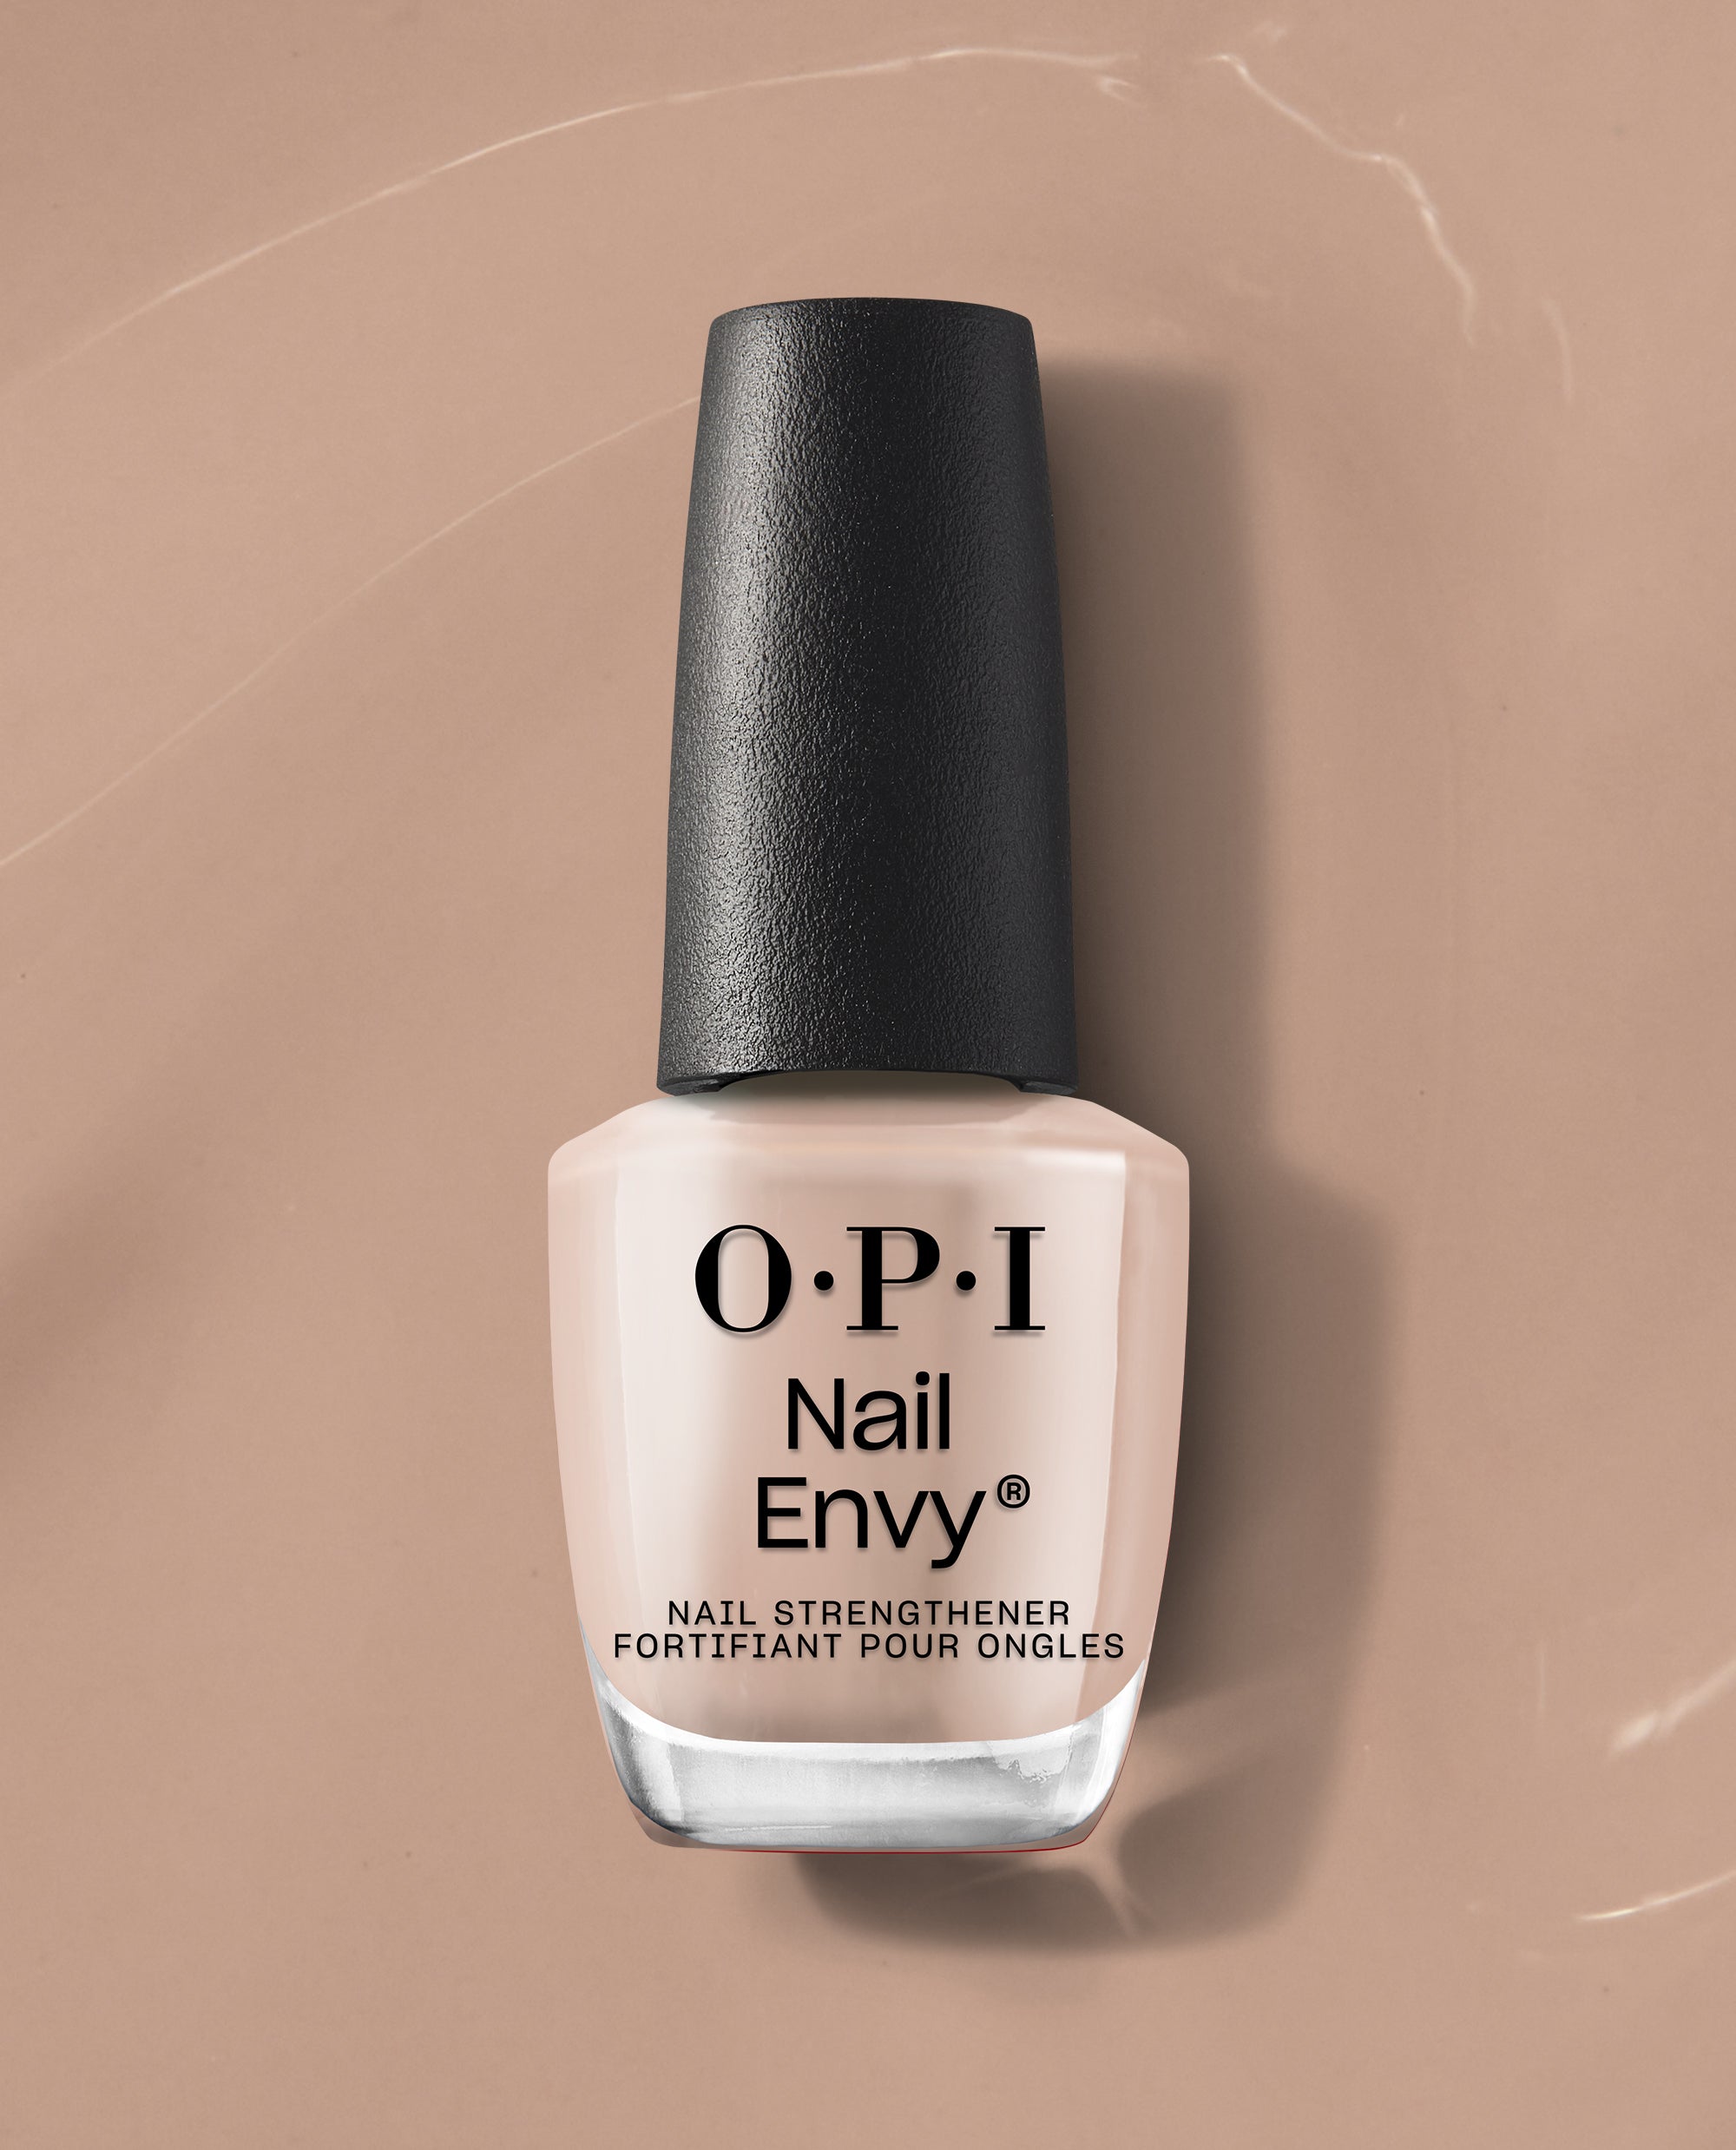 OPI India - You're a diamond – strong, beautiful and unbreakable. 💎 Dip  into a magical elixir that offers your nails that unfailing strength too!  💪 Shop OPI's Natural Nail Strengthener now